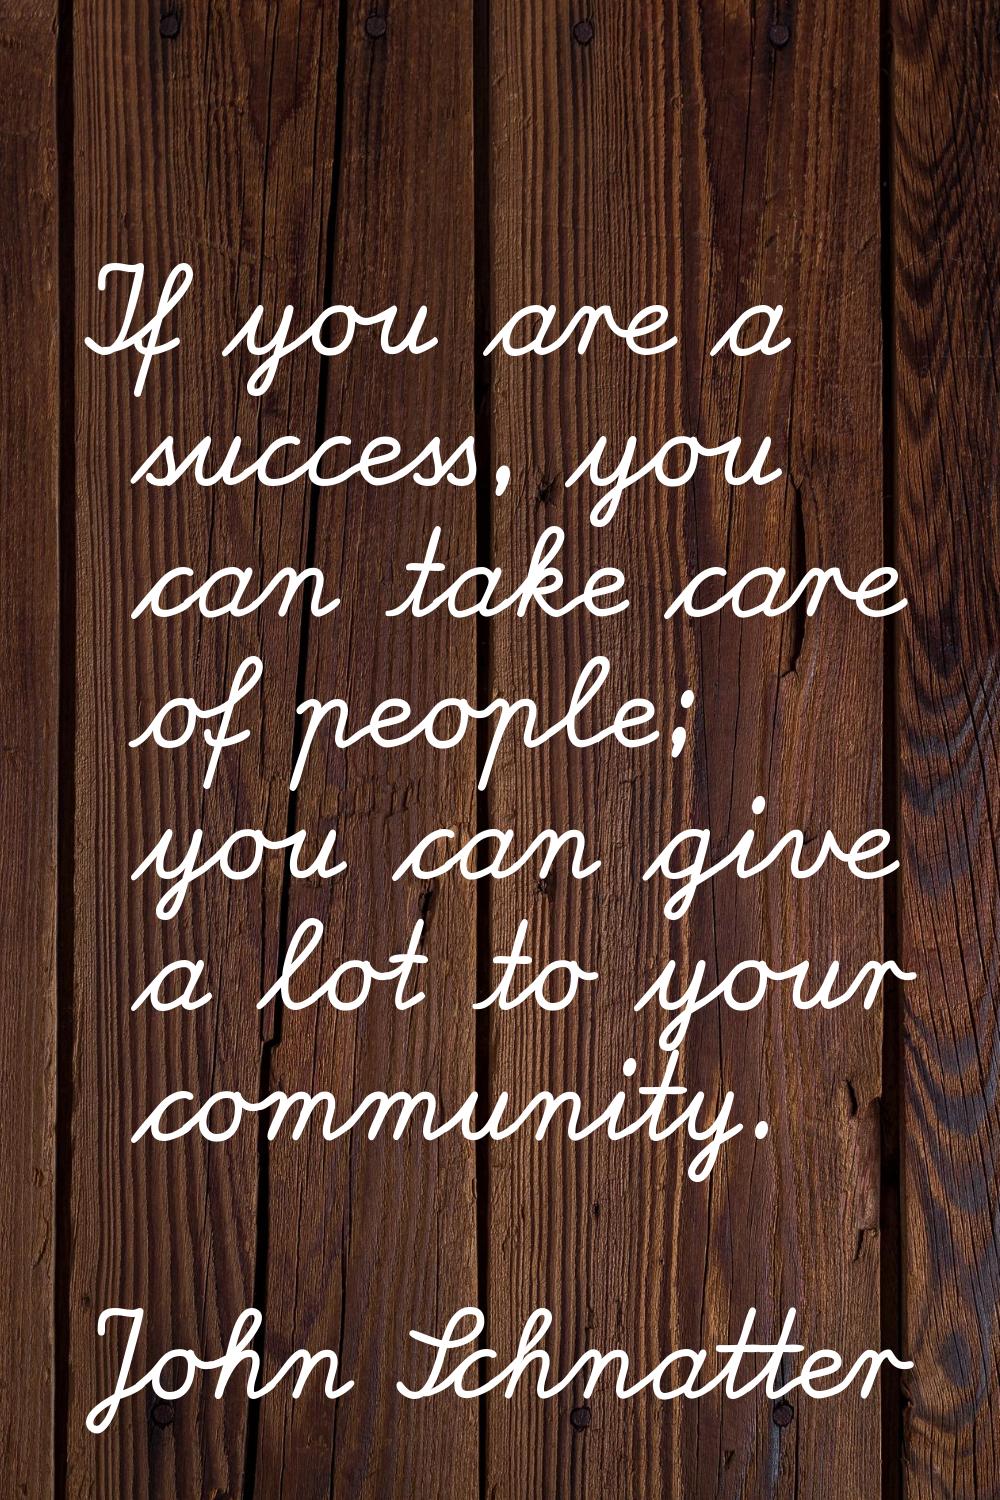 If you are a success, you can take care of people; you can give a lot to your community.